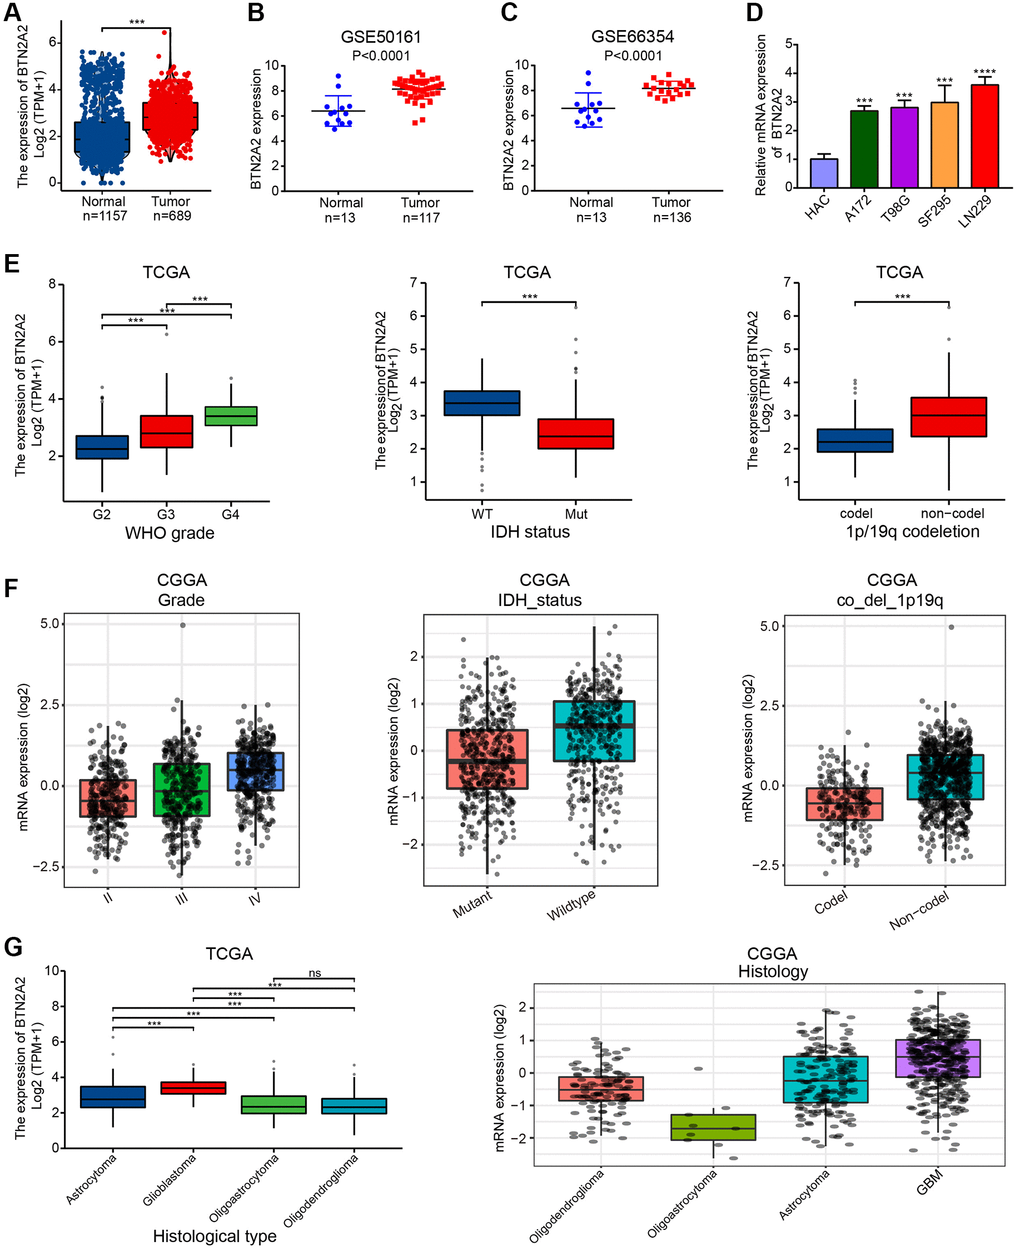 Correlation between BTN2A2 expression and CFs. (A) BTN2A2 expression in patients with glioma in TCGA cohort. (B, C) BTN2A2 expression in patients with glioma in GEO cohort. (D) BTN2A2 expression in normal human astrocytes cells (NHA) and glioma cells (A172, T98G, LN229, and SF295) was determined using qRT-PCR. (E–G) Correlation between BTN2A2 expression and CFs (grade, IDH status, 1p/19q codeletion, age, primary therapeutic outcome, and histological type). *P **P ***P 